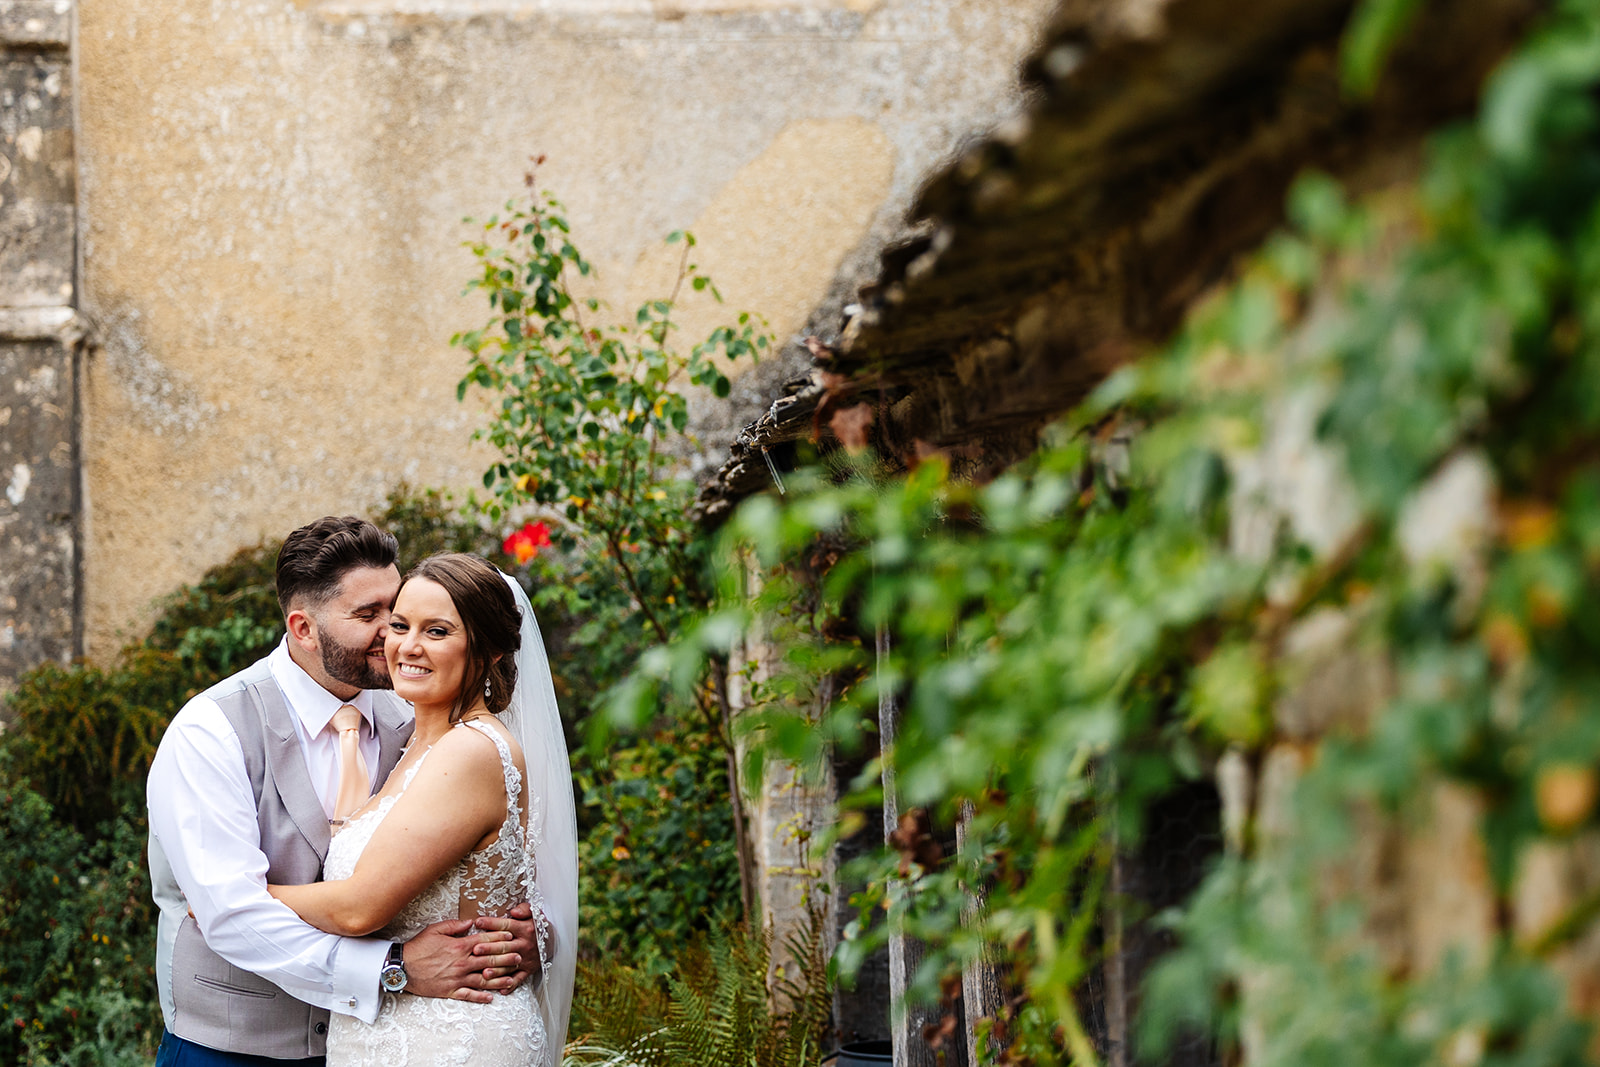 Couple in grounds of Caswell House with flowers and greenery in the background, Groom kisses Bride on the cheek